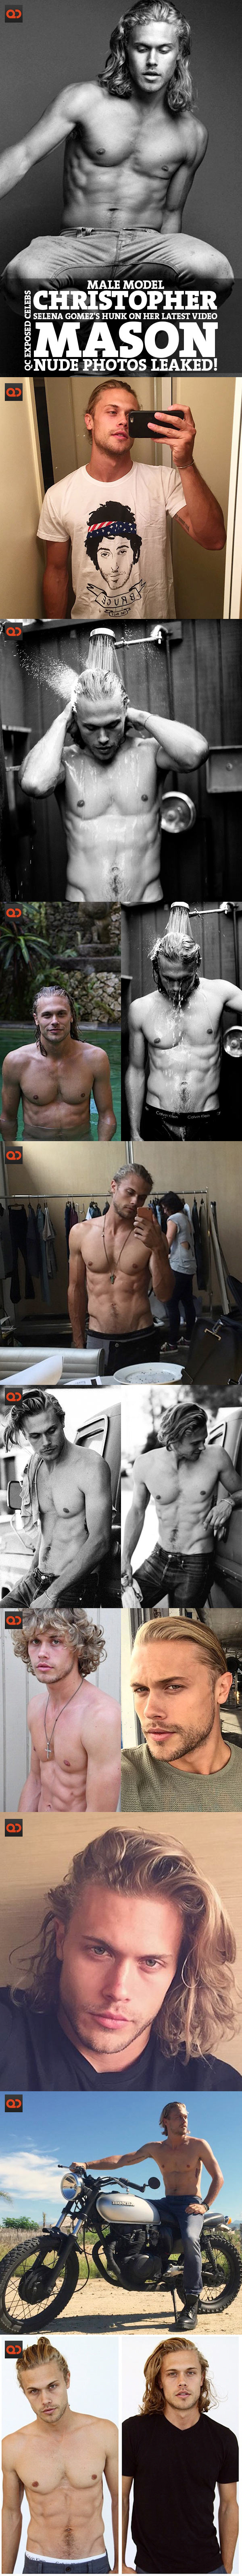 Male Model Christopher Mason, Selena Gomez's Hunk On Her Latest Video, Nude Photos Leaked!